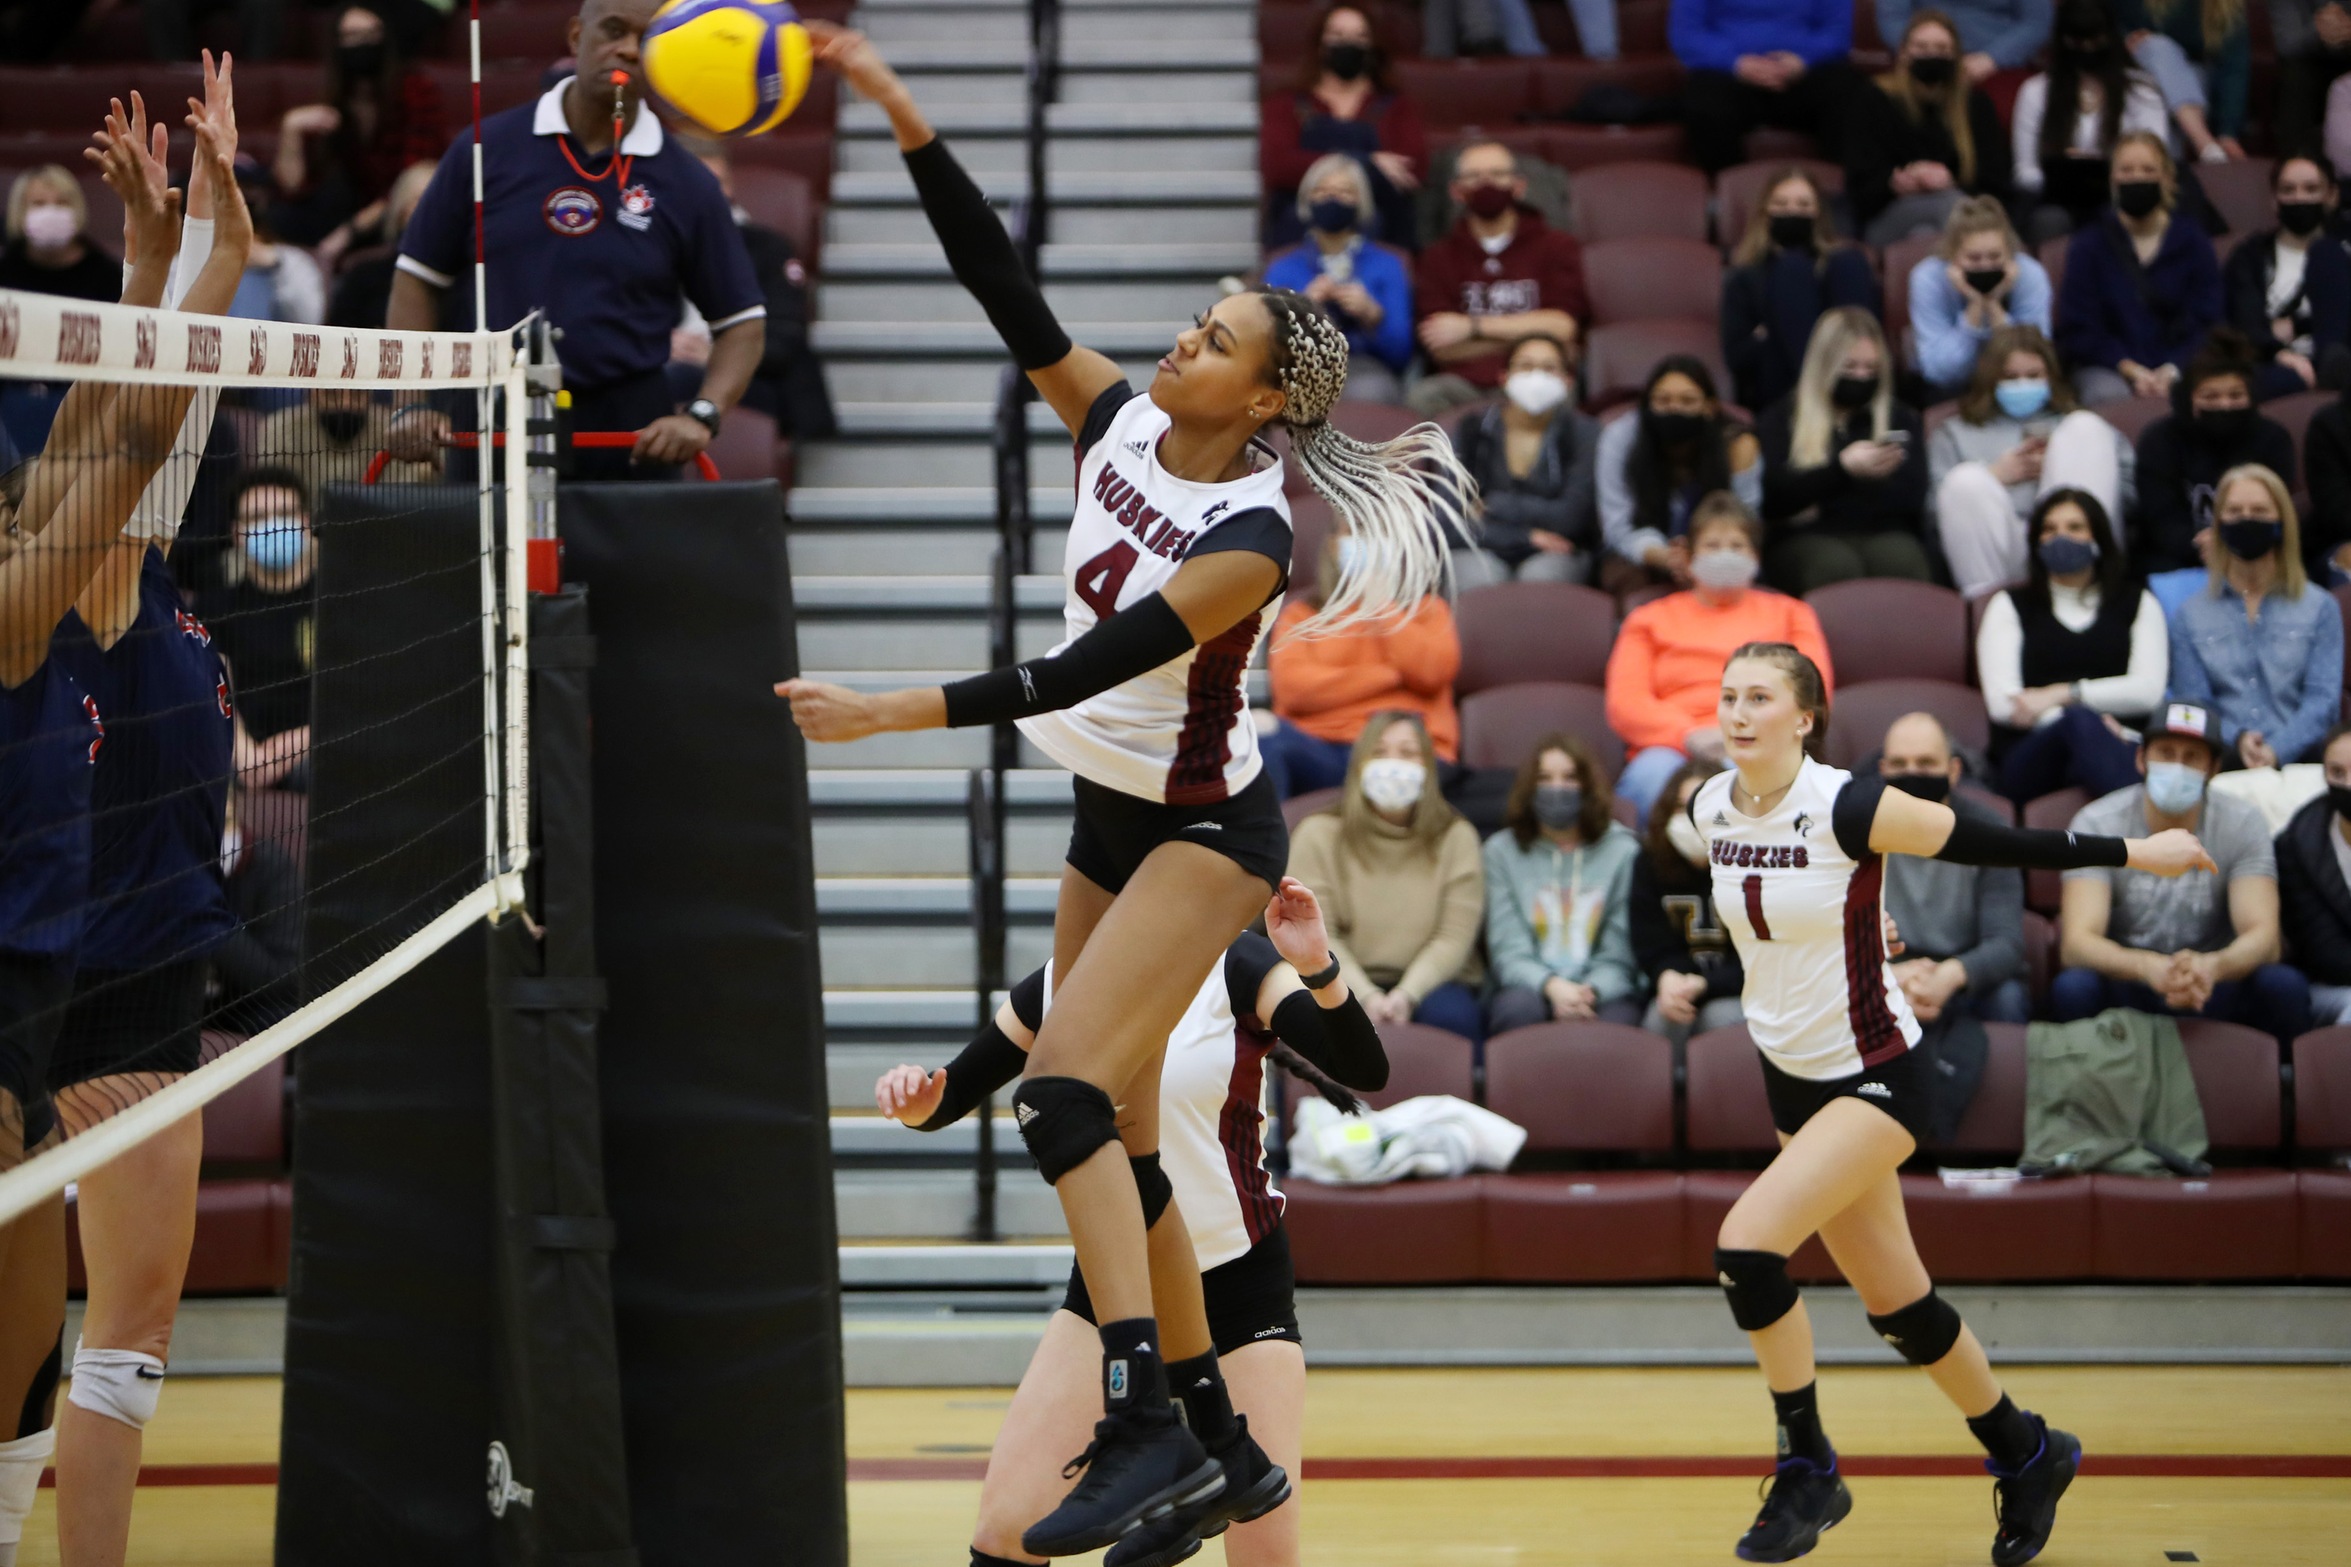 Huskies middle blocker Mariama Syll powers an attack agains the Acadia Axewomen during a 3-2 Axewomen win on Sunday, Feb. 20, 2022.